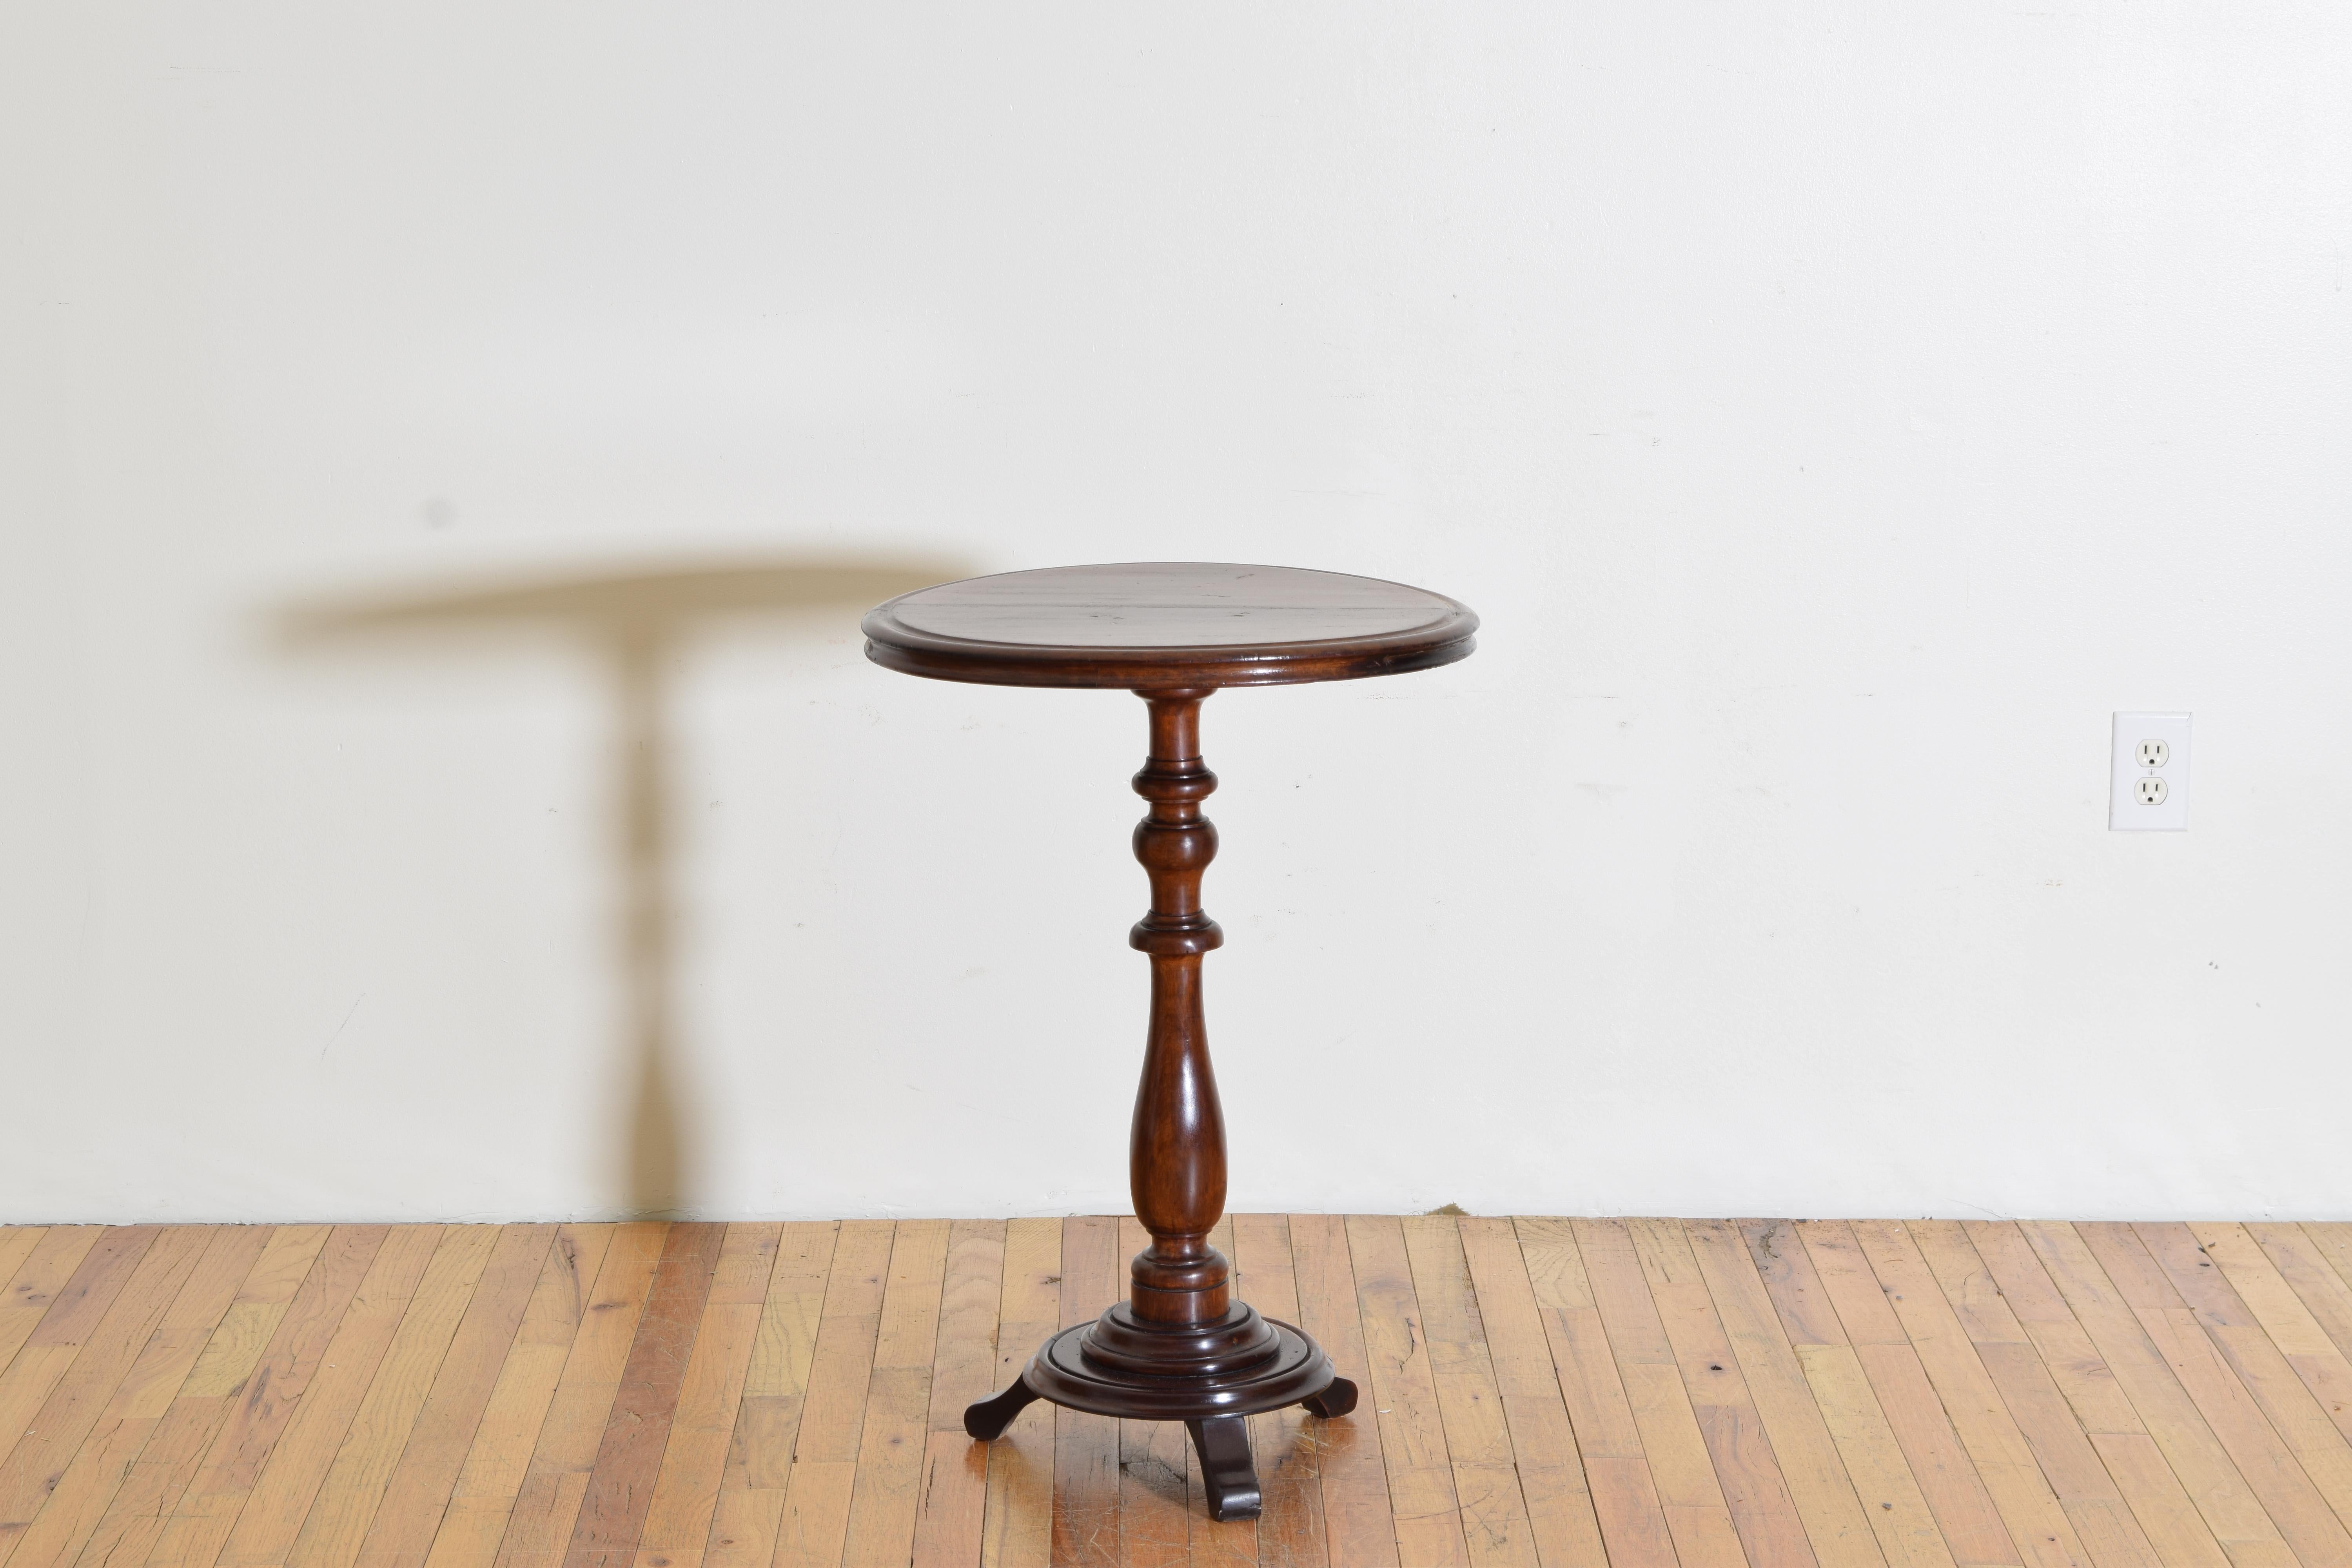 Having a circular top with unique molded edge atop a turned standard on a graduated plinth-form base, the circular base issuing three shaped feet